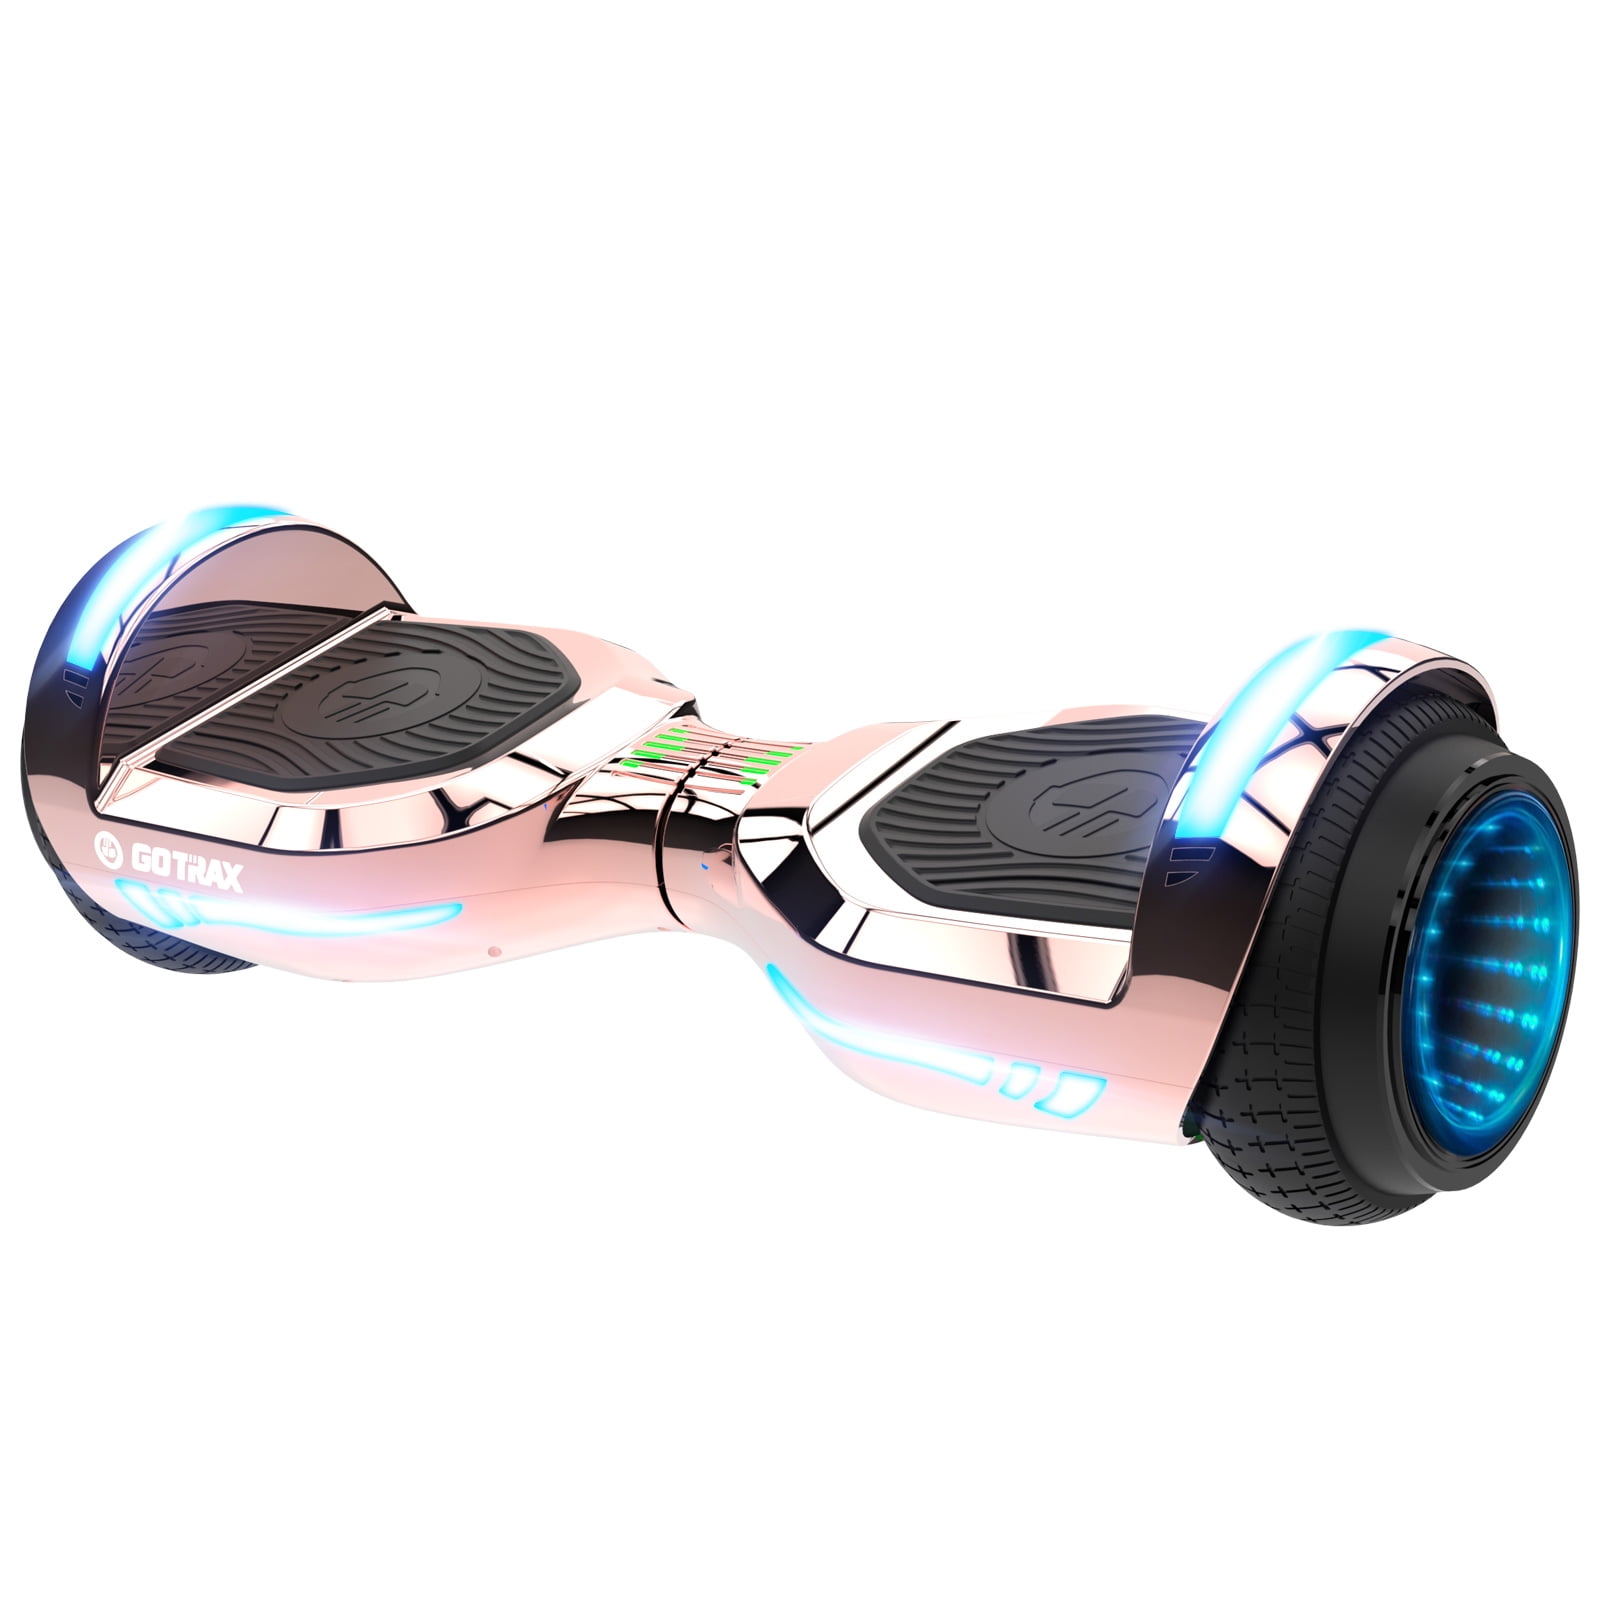 Use Play Space to Play Hoverboard Heroes